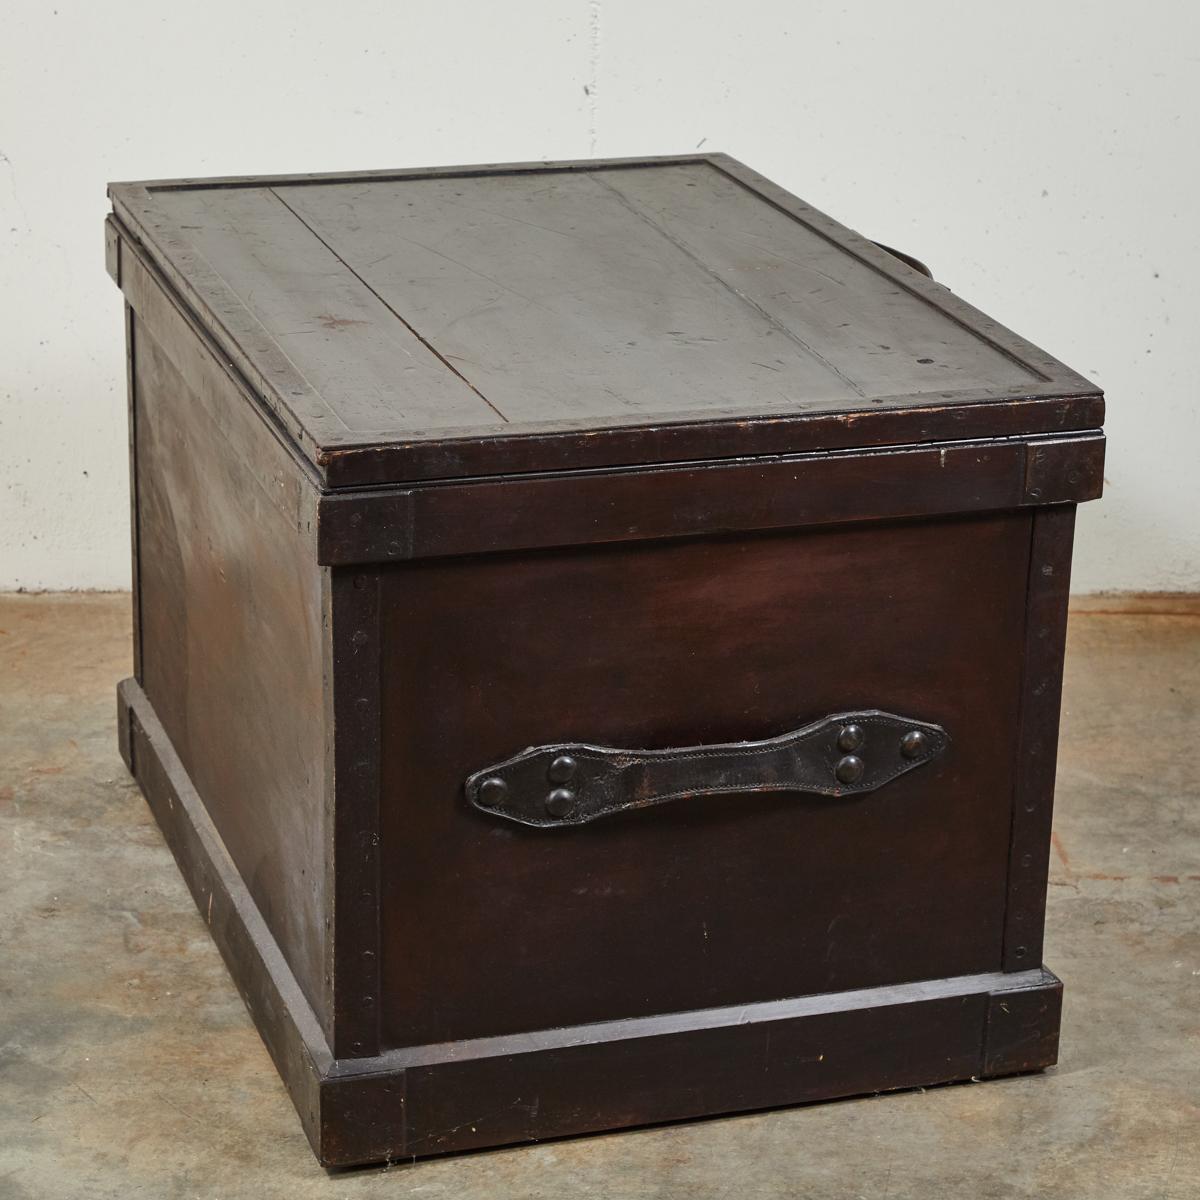 1860s English Large Painted Camphorwood Silver Chest with Leather Handles For Sale 1